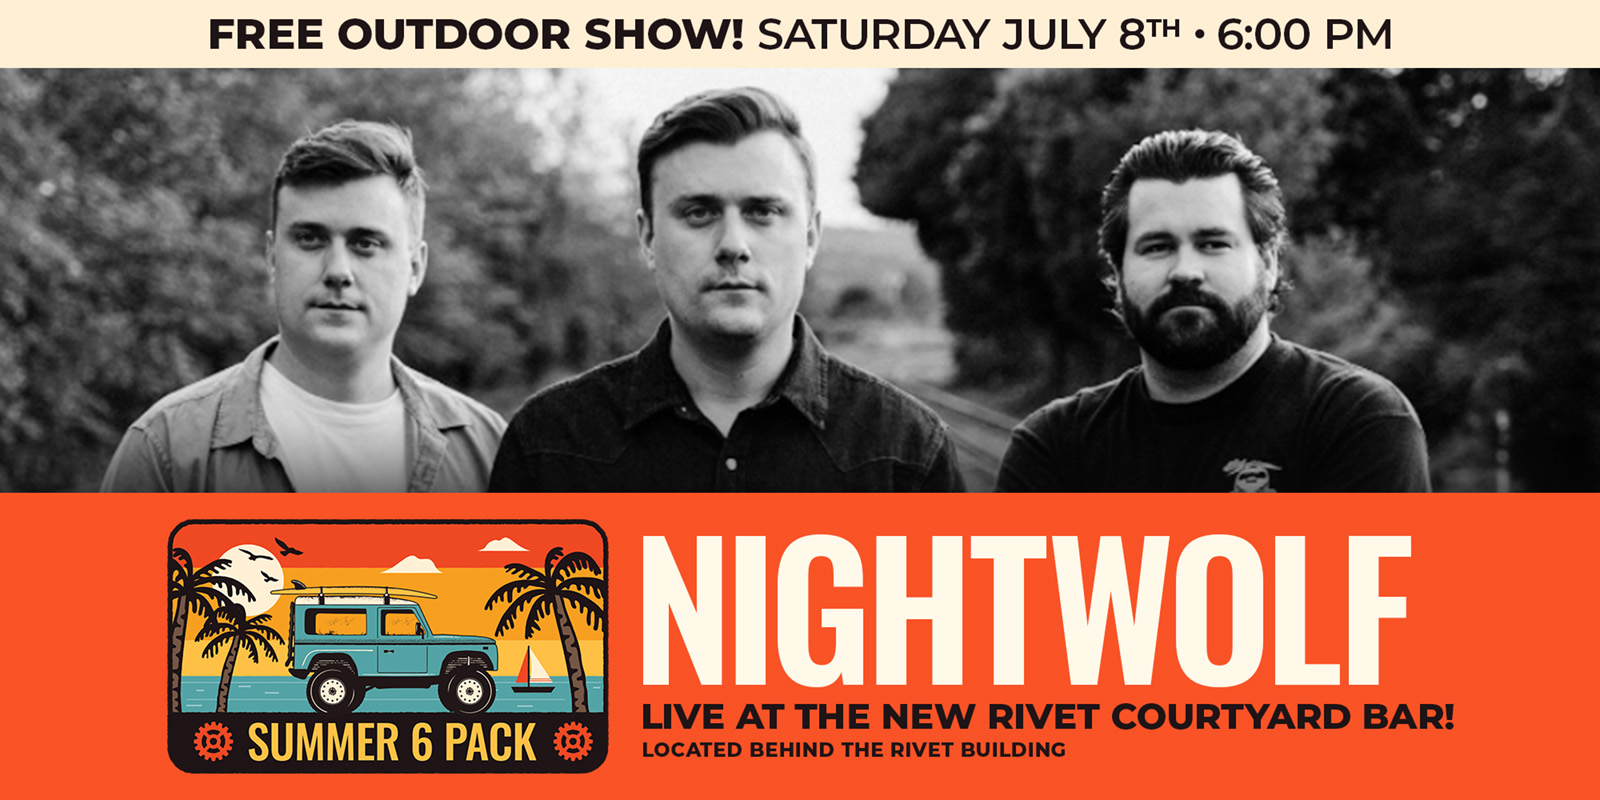 The Summer 6 Pack Free Outdoor Series continues at Rivet: Canteen & Assembly with NIGHTWOLF on Saturday, July 8th, 2023. Join us!